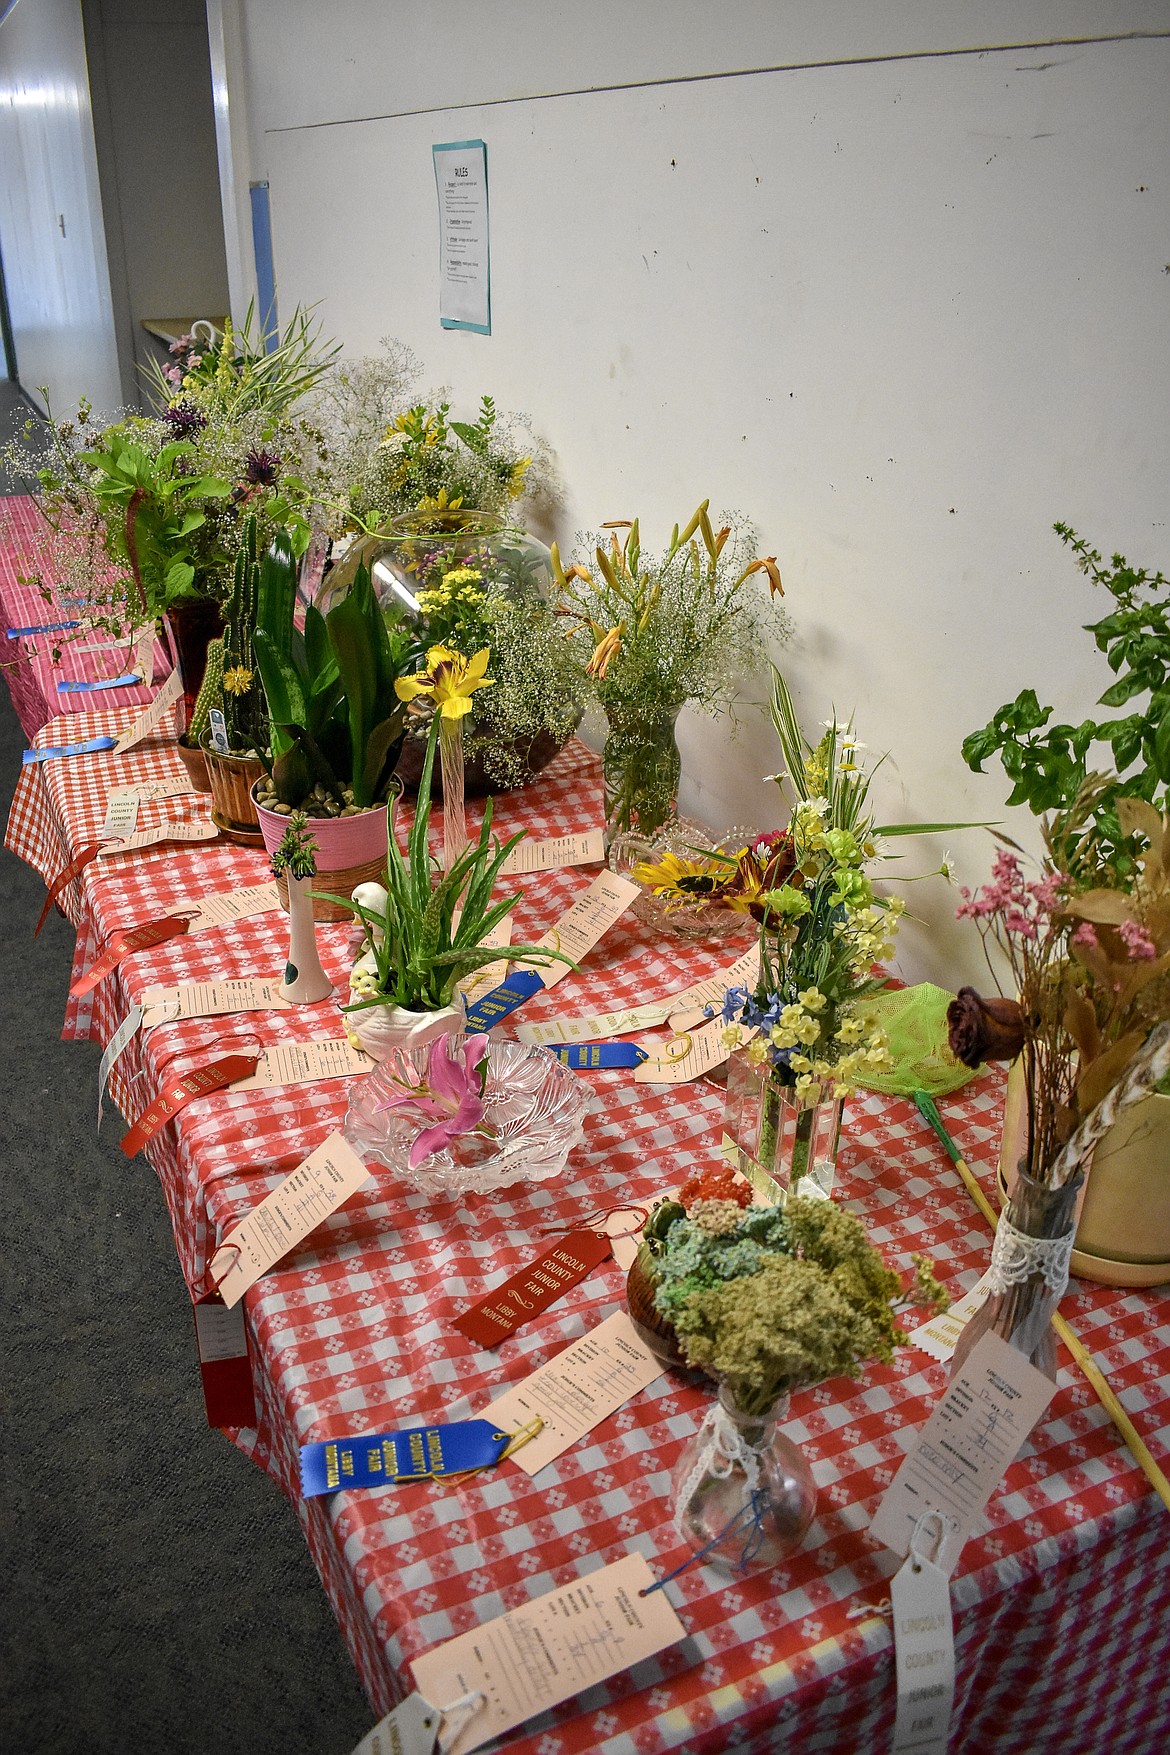 A variety of floral arrangements adorn the halls of the former Asa Wood school building during the 2018 Lincoln County Junior Fair. (Ben Kibbey/The Western News)